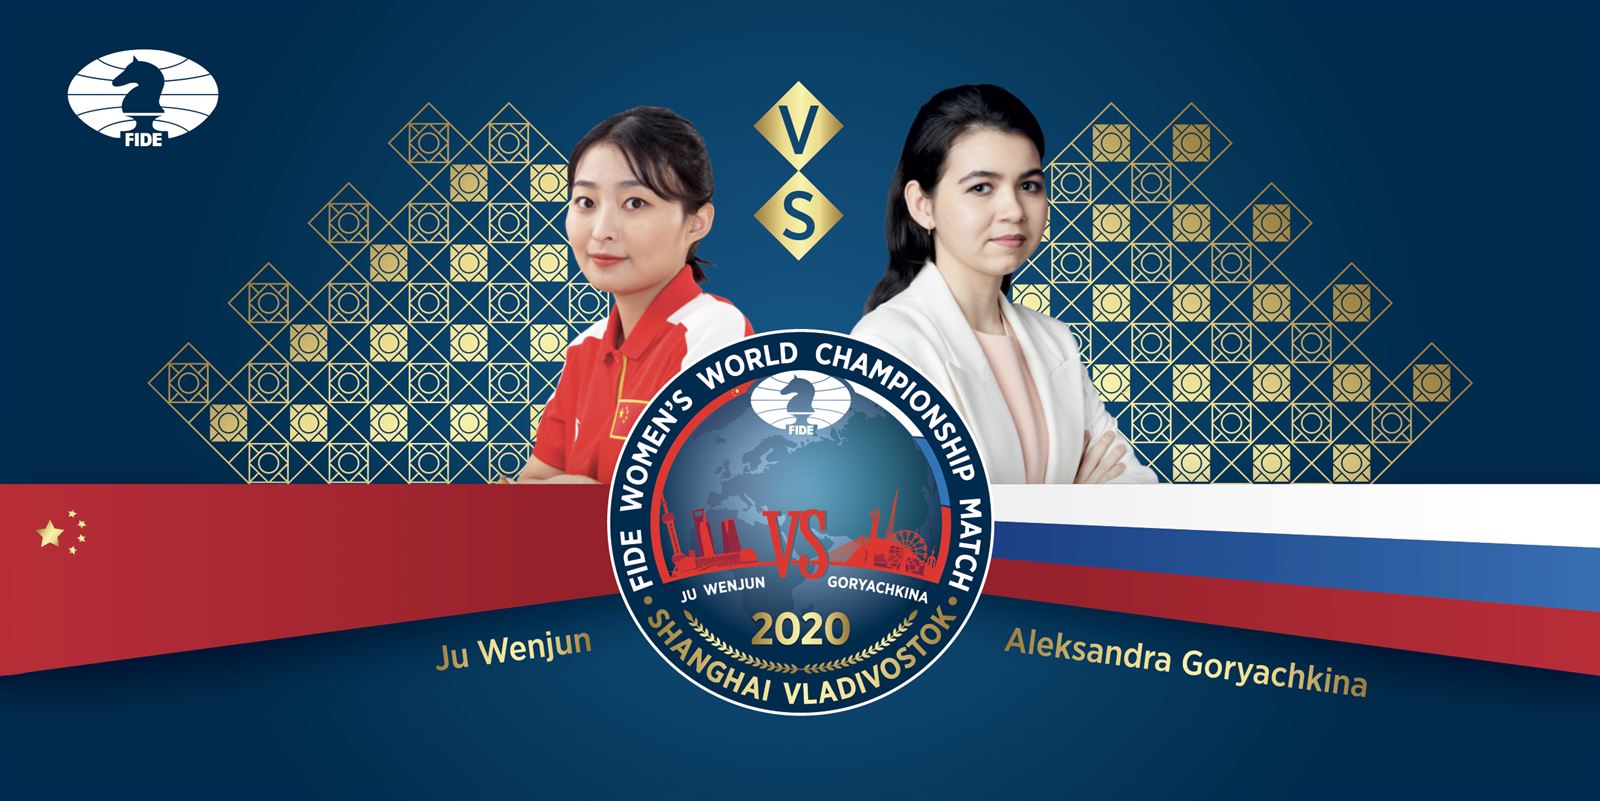 Women's Chess' and equal footing